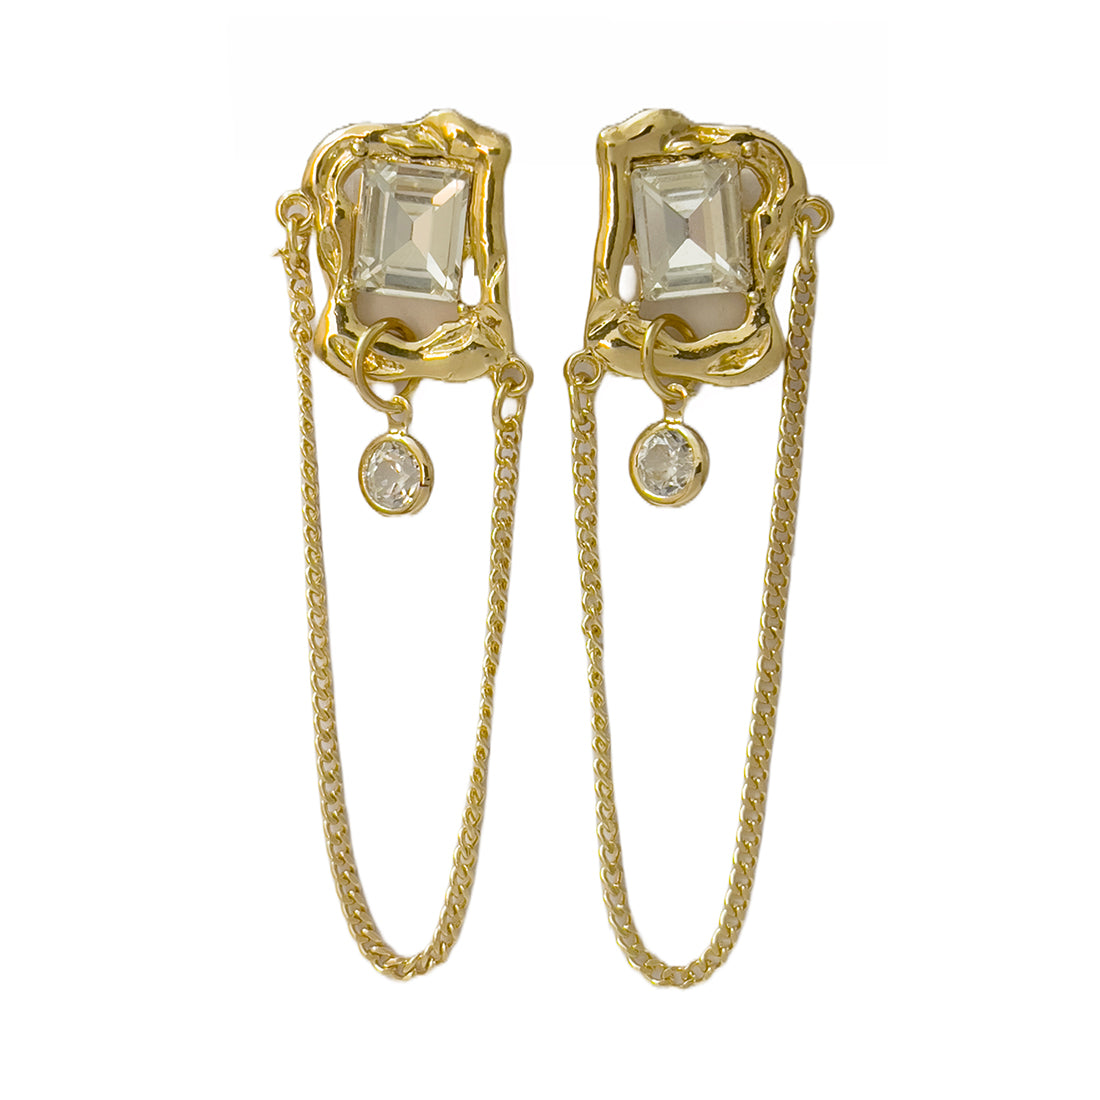 Oversized Hammered Square Gold-Toned Diamante Stud & Tassel Drop Earrings